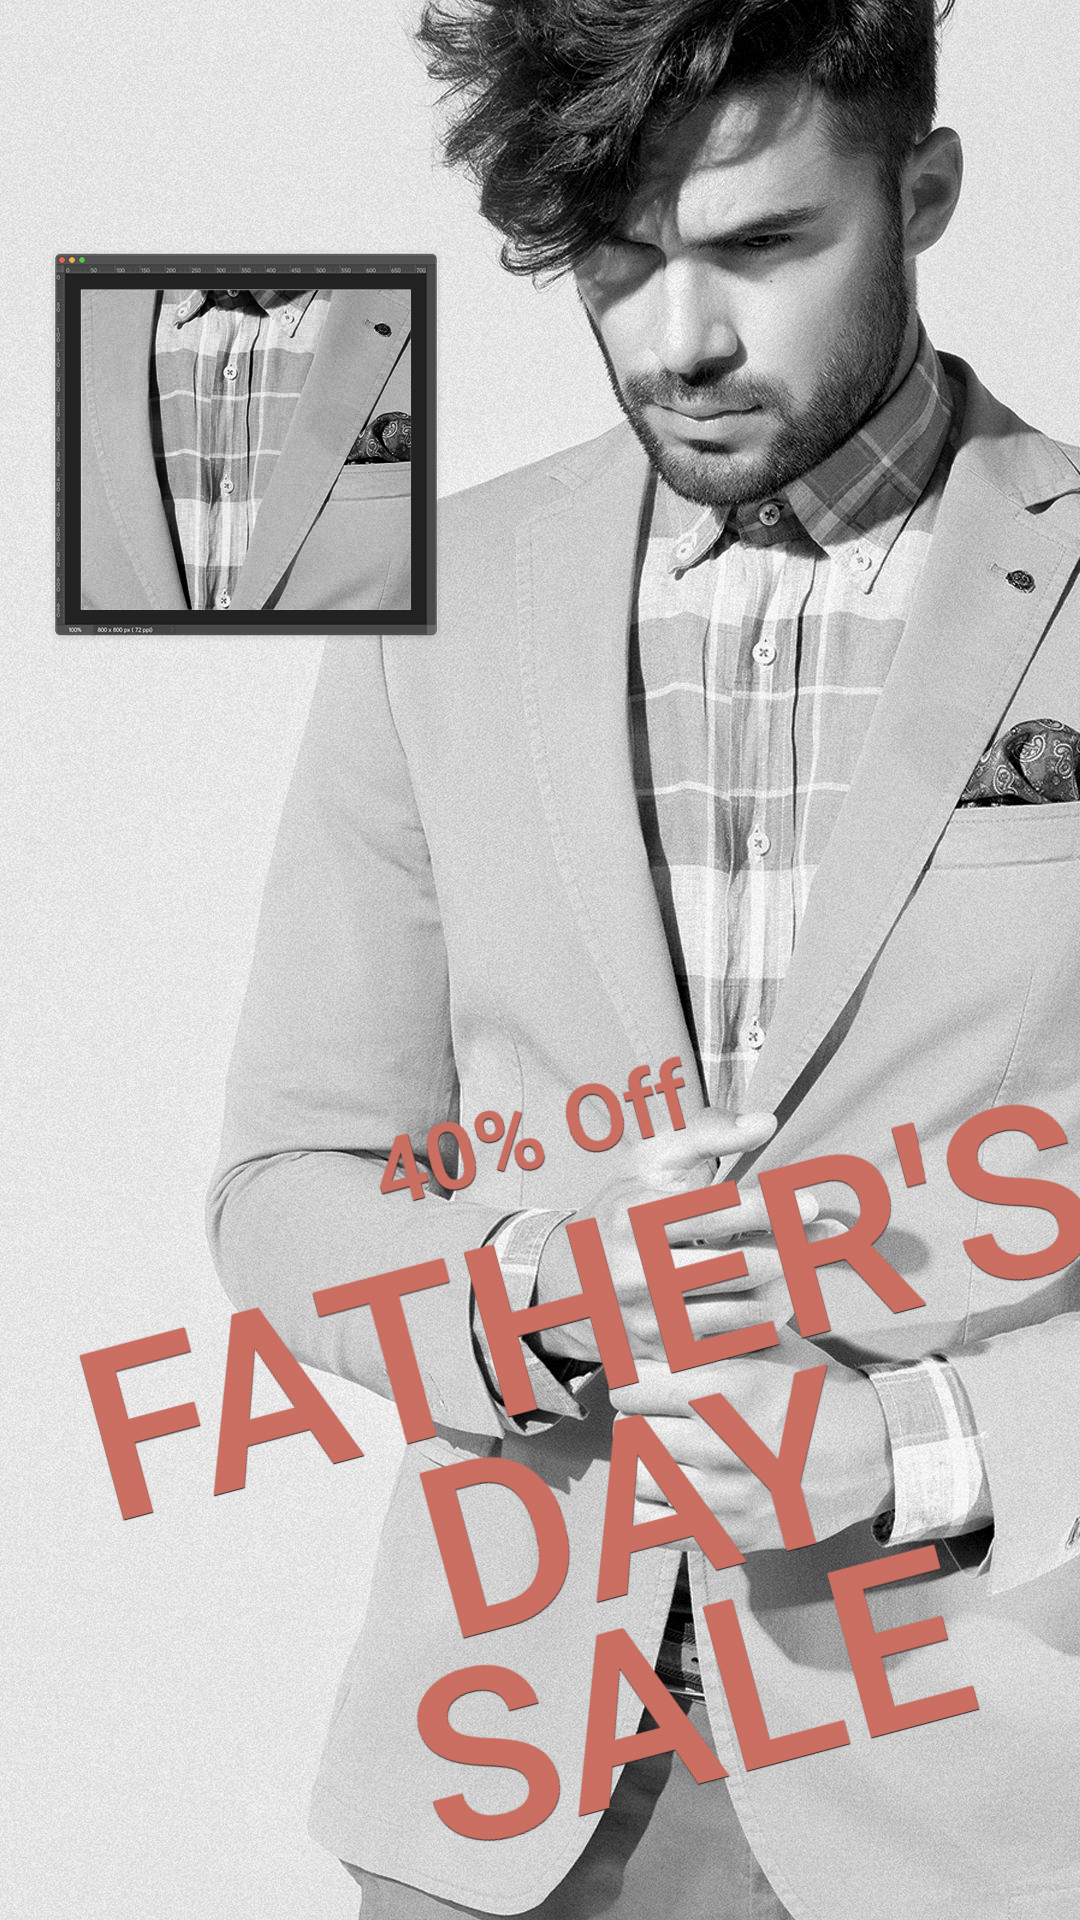 Retro Style Men's Suits Father's Day Sale Ecommerce Story预览效果